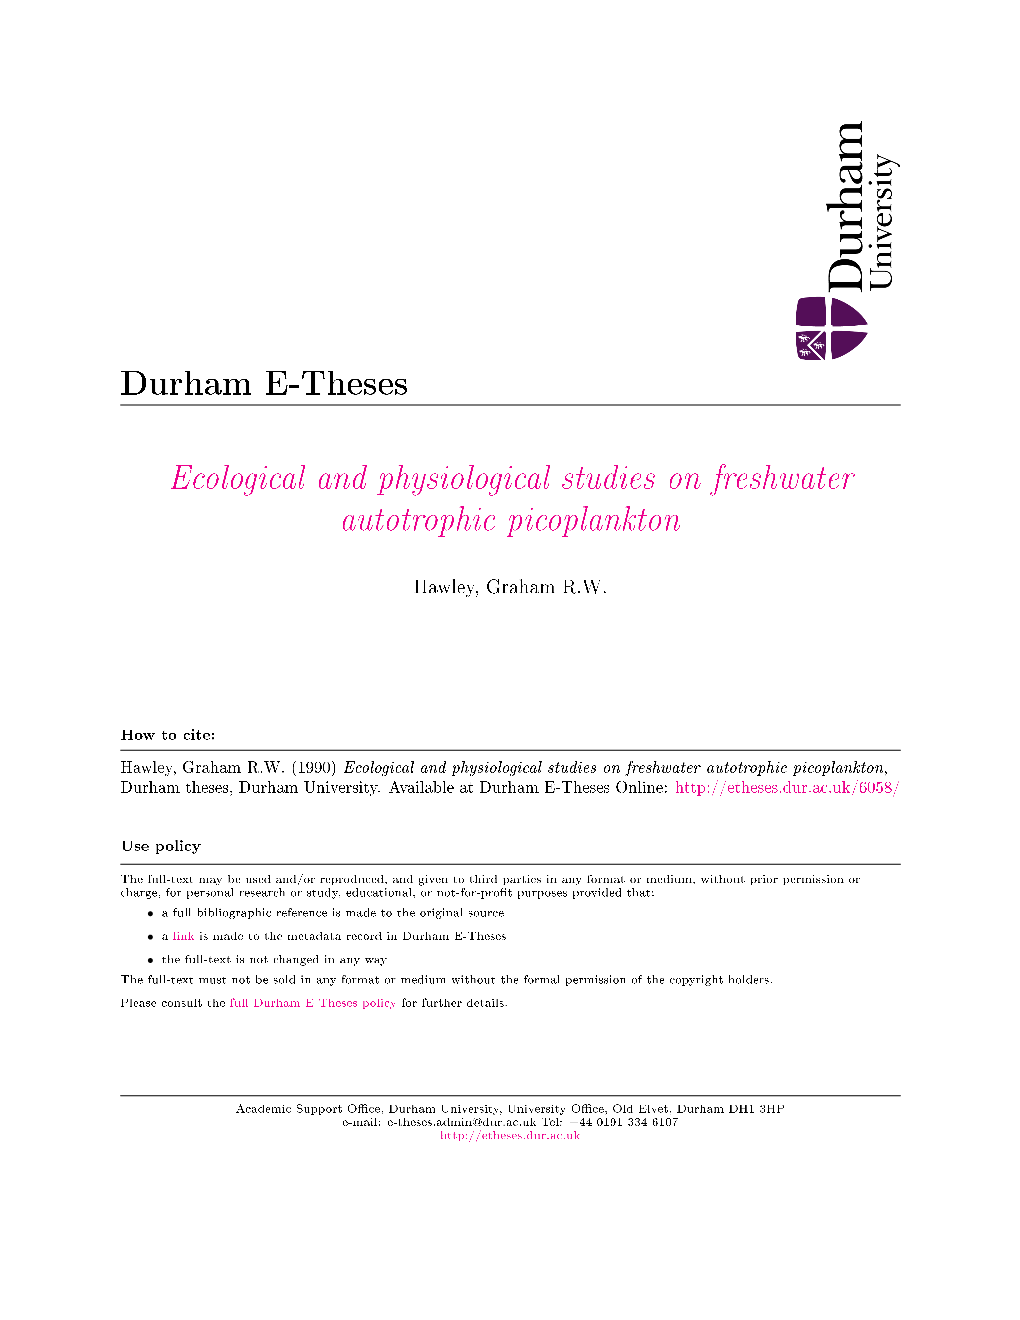 Ecological and Physiological Studies on Freshwater Autotrophic Picoplankton